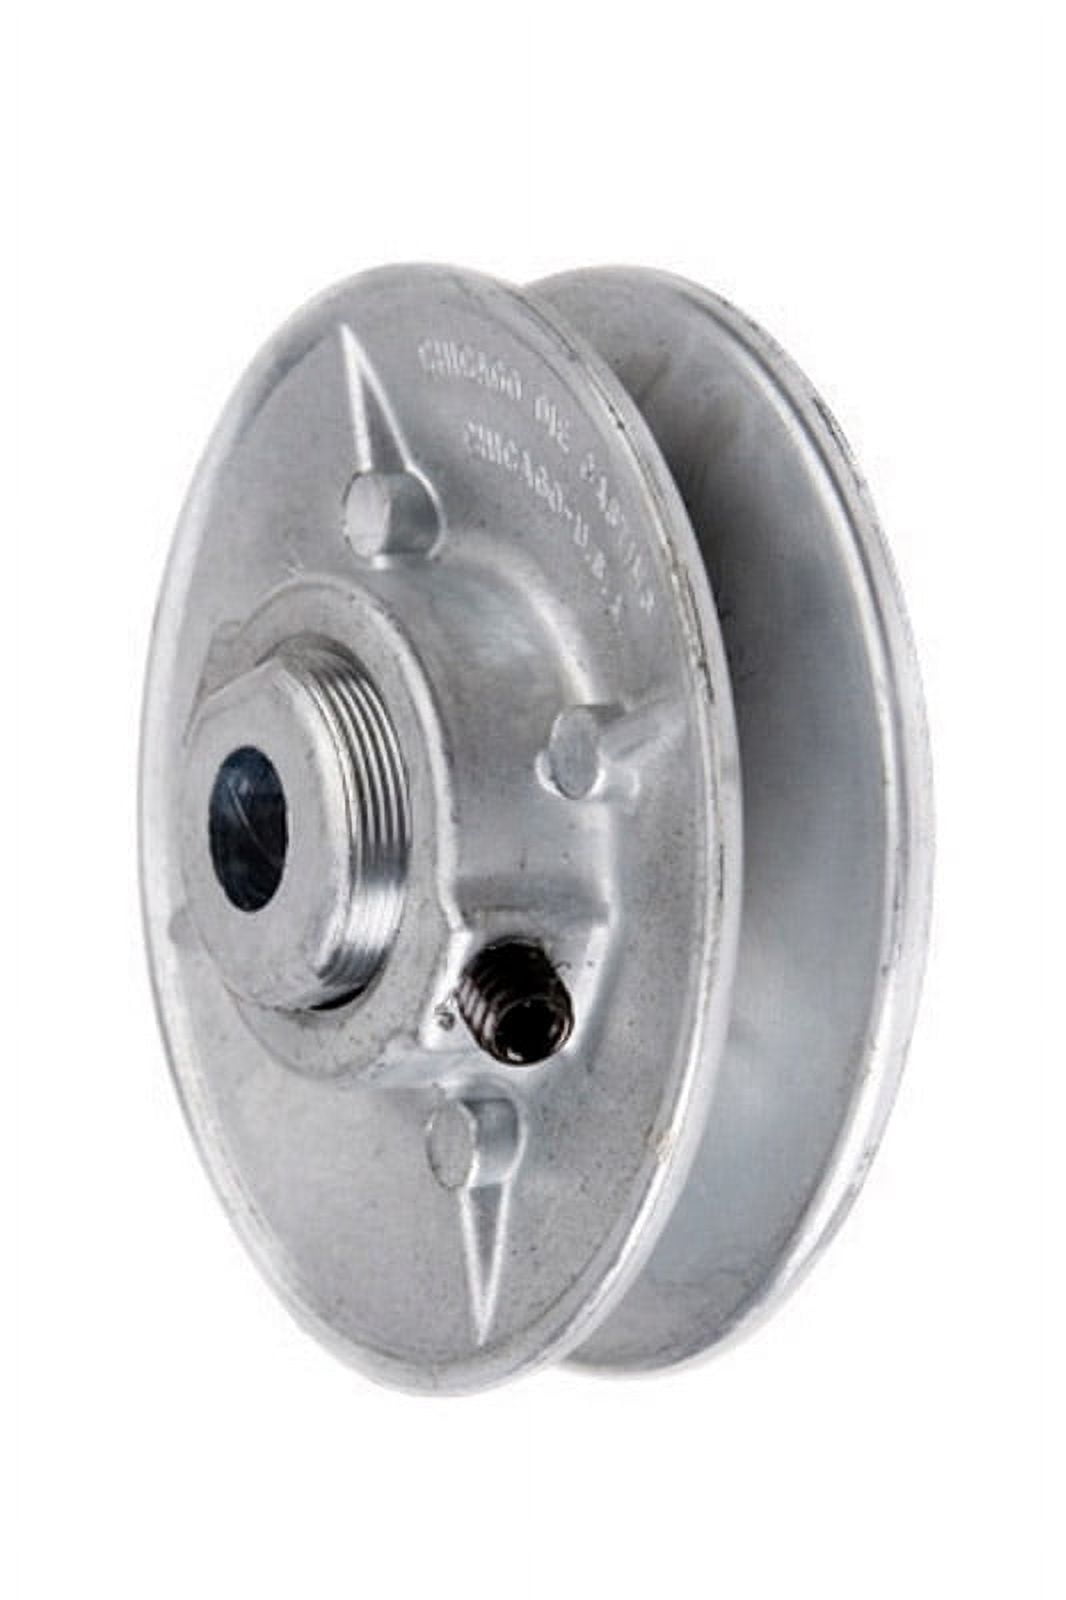 Picture of Chicago Die Casting 2001675 3.75 x 0.5 in. Bore Pulley